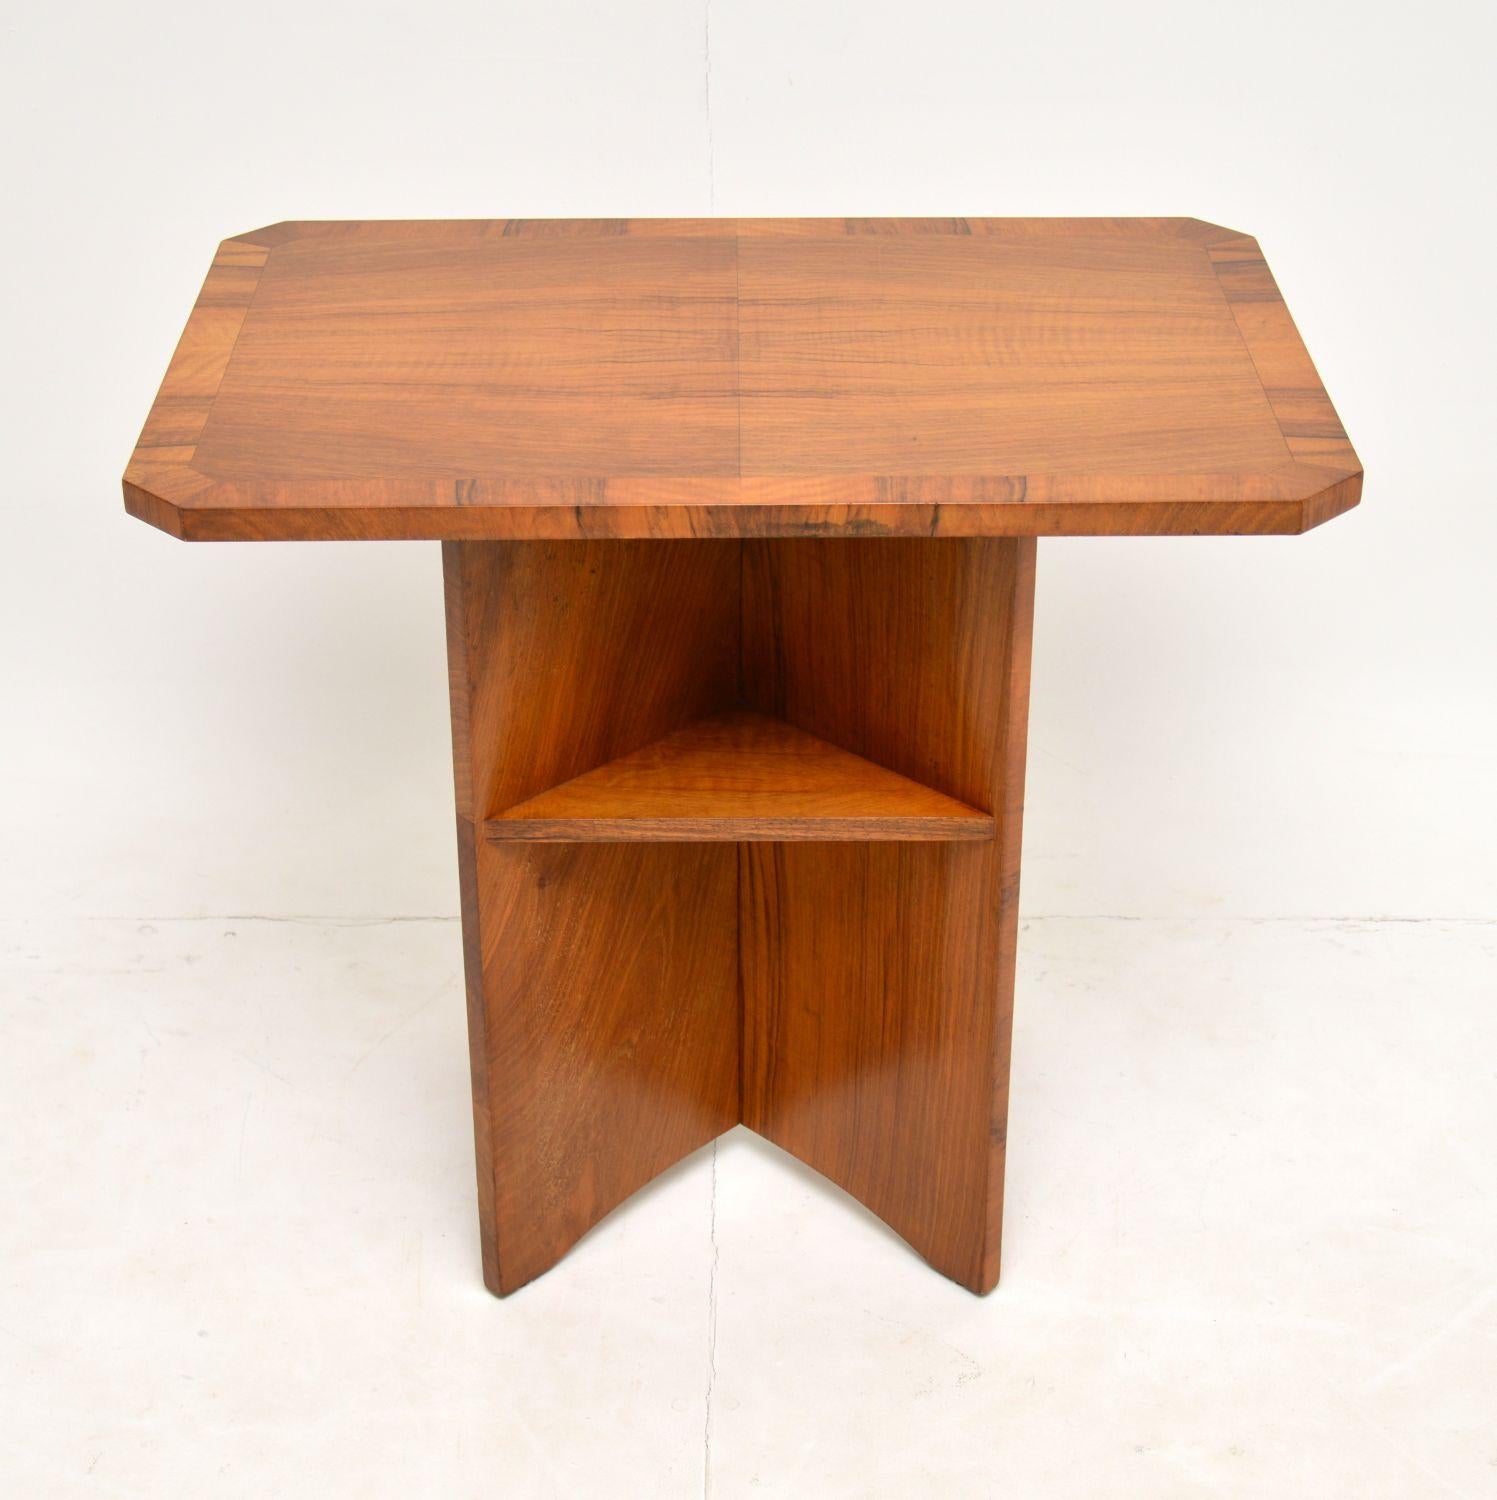 A beautiful and interesting original vintage Art Deco period side / coffee table in walnut. This was made in England, it dates from the 1930’s.

The quality is excellent and this has a lovely design. The top is cross banded, and the lower section